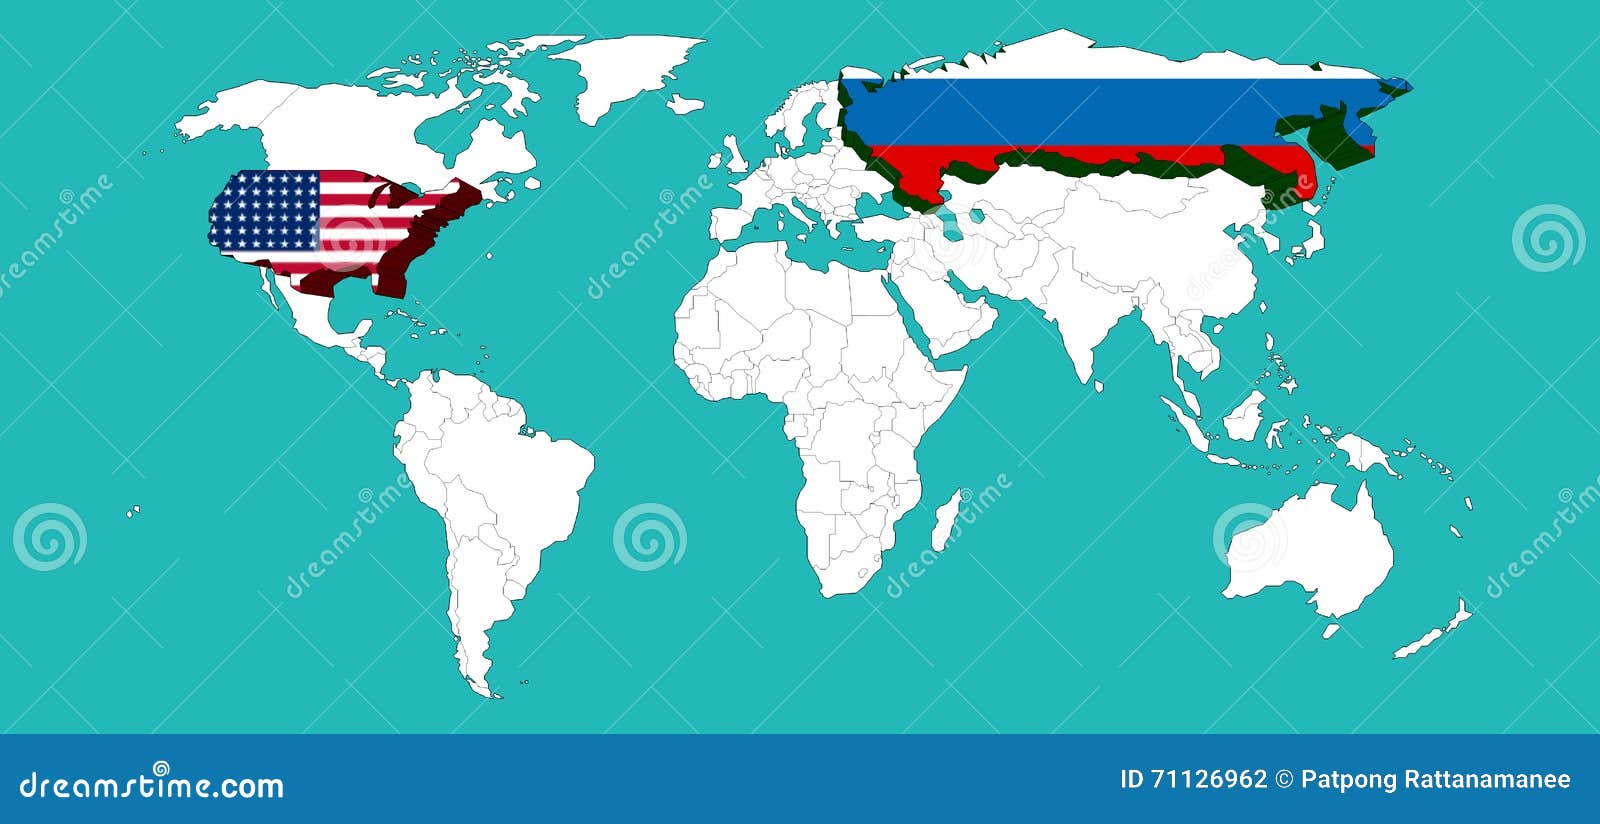 World Map Decorated Usa By Usa Flage And Russia By Russia Flage